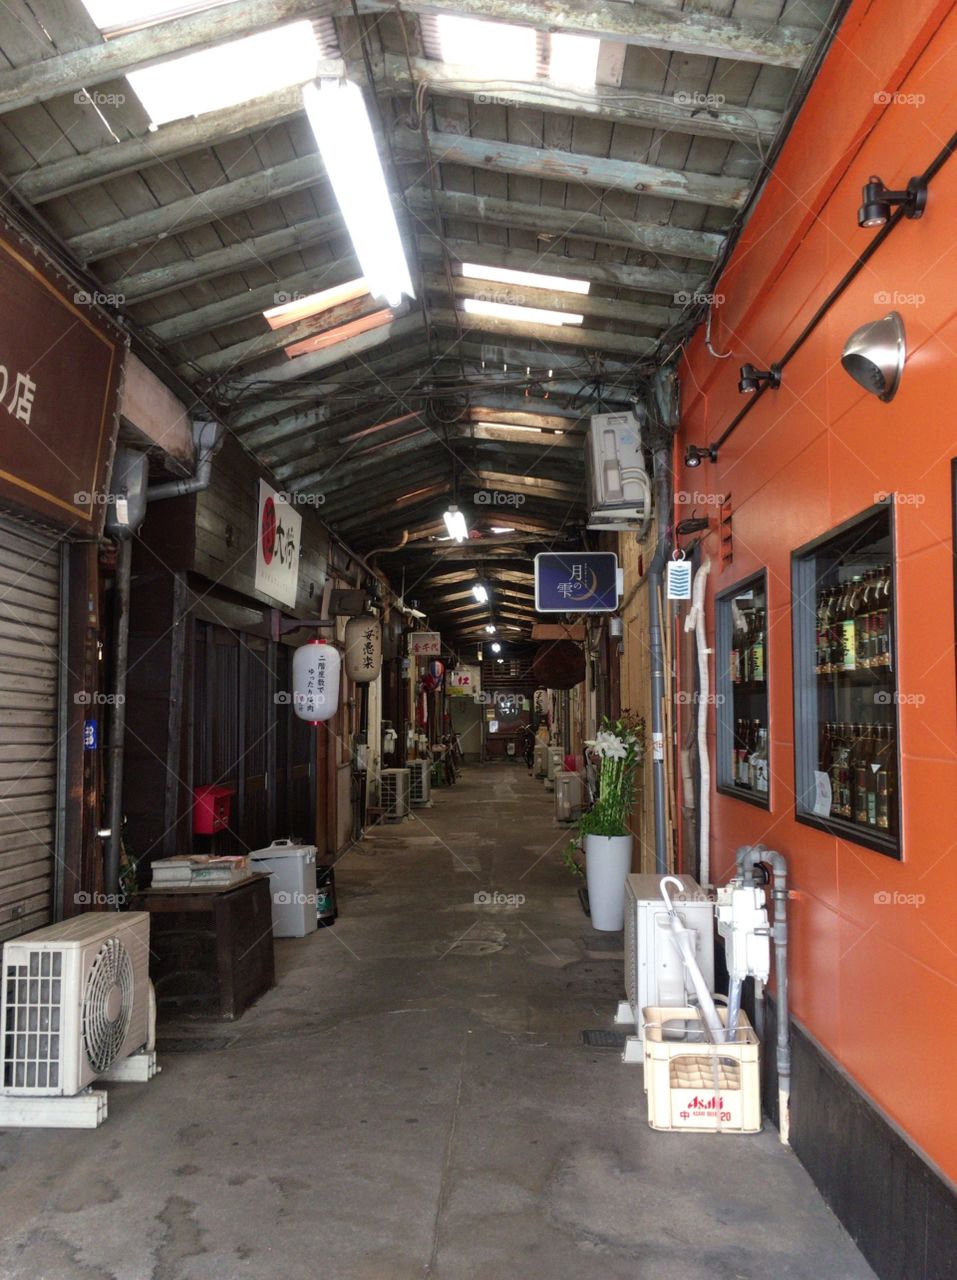 There are small bars and shops in the alley